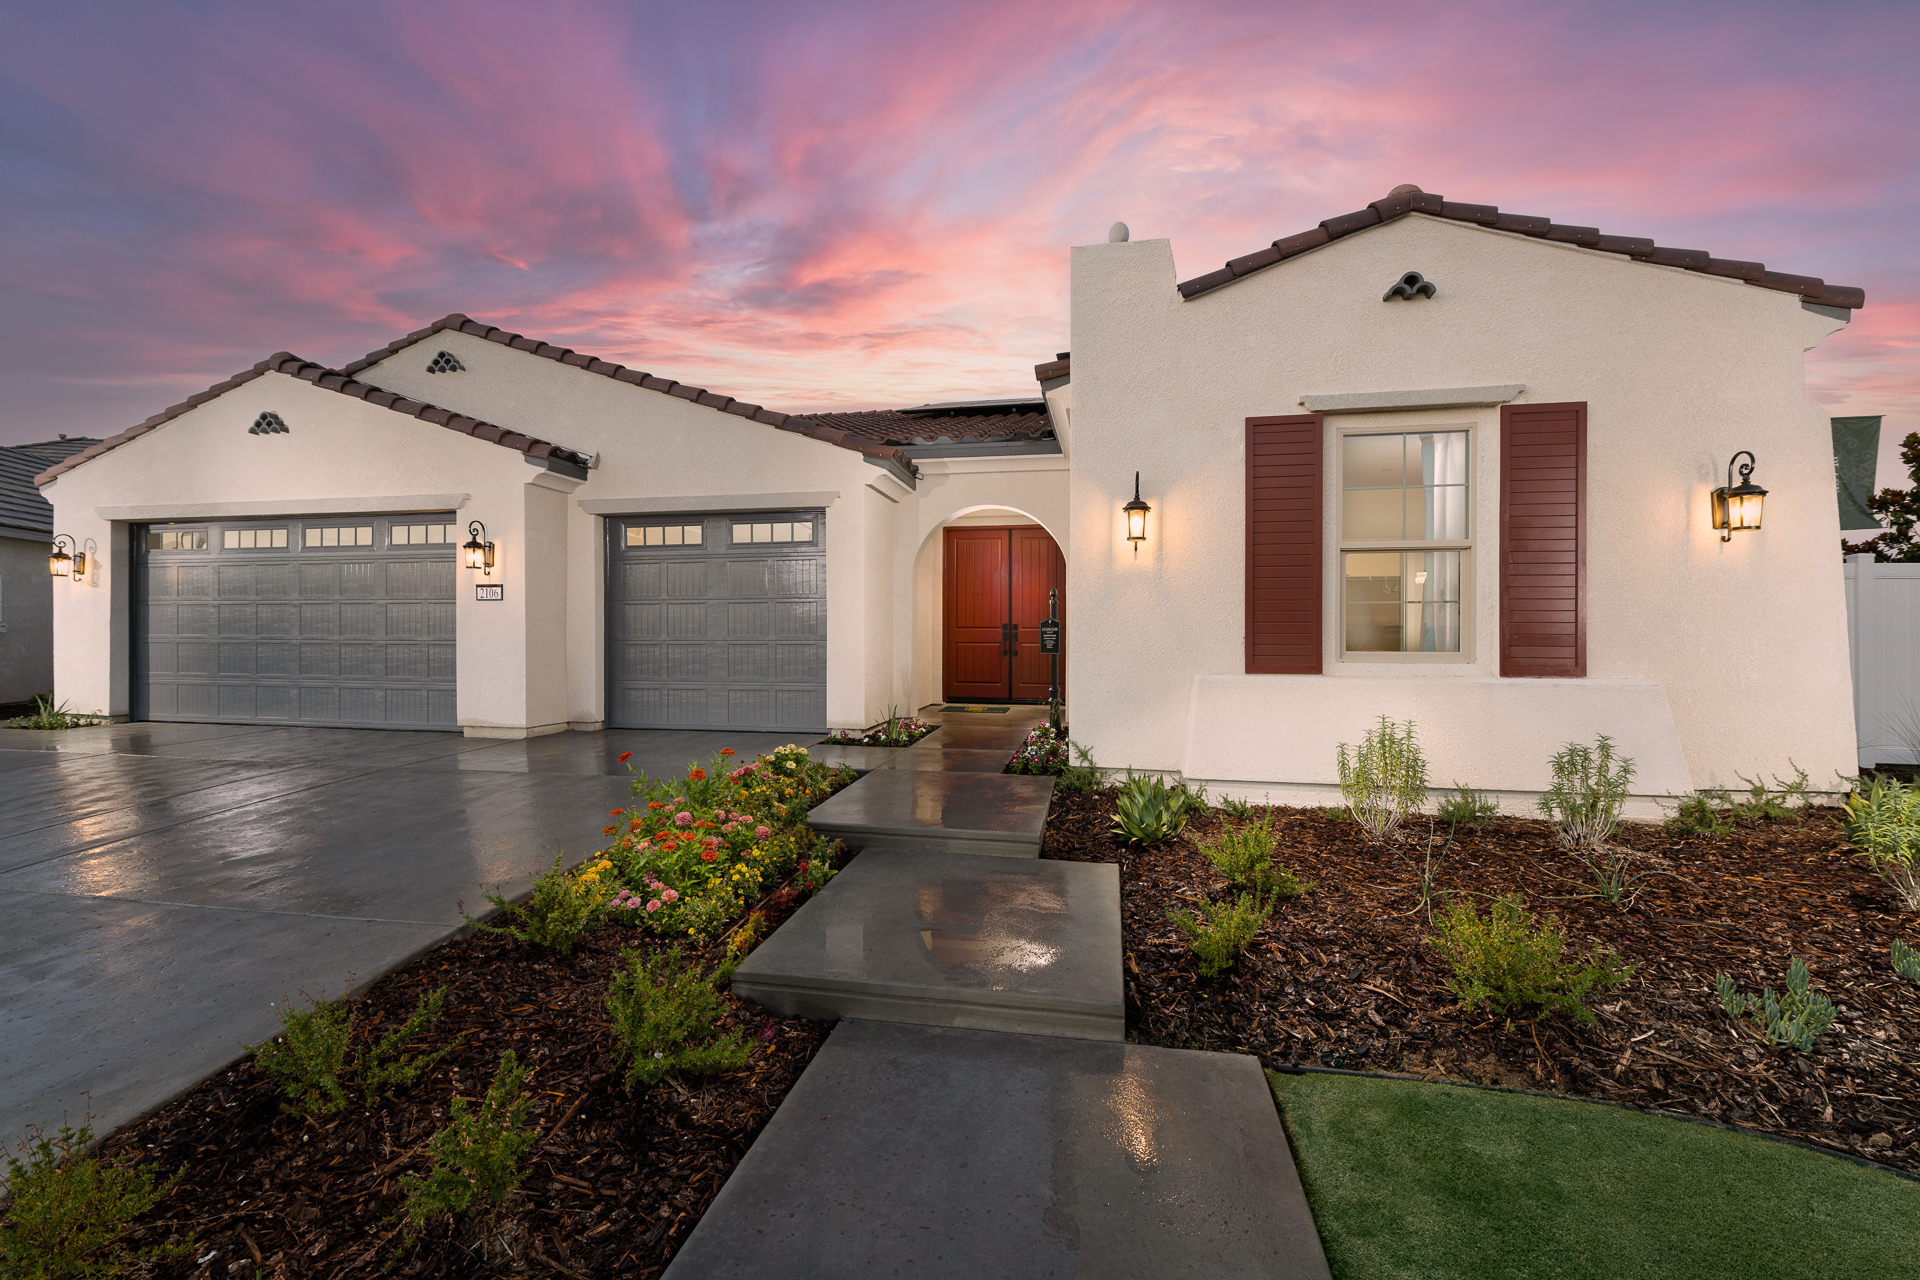 A modern suburban home with white stucco walls and gray roofs, featuring a double garage and a landscaped pathway leading to a wooden front door, set against a vibrant sunset sky.